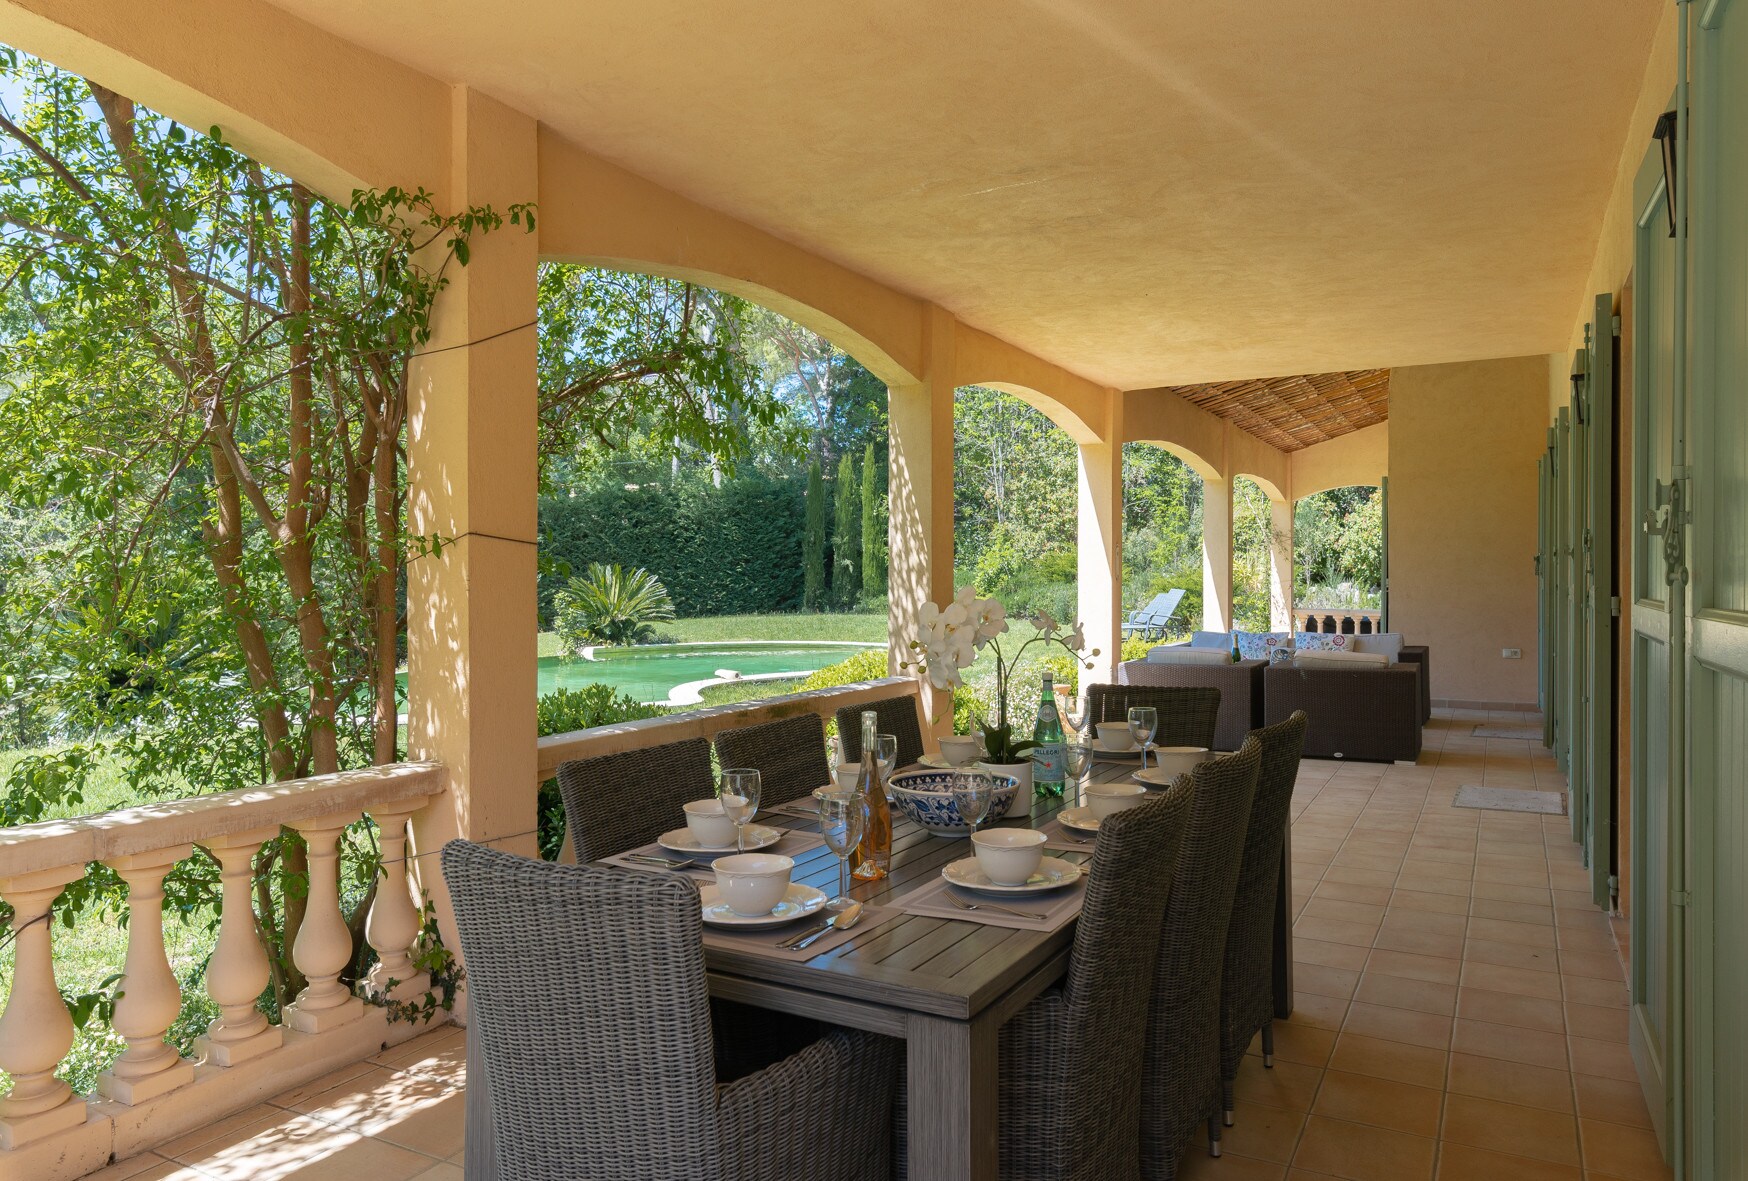 Property Image 2 - Lovely family villa with 4 bedrooms, pool and nice garden, only a 10-minute walk to Valbonne village